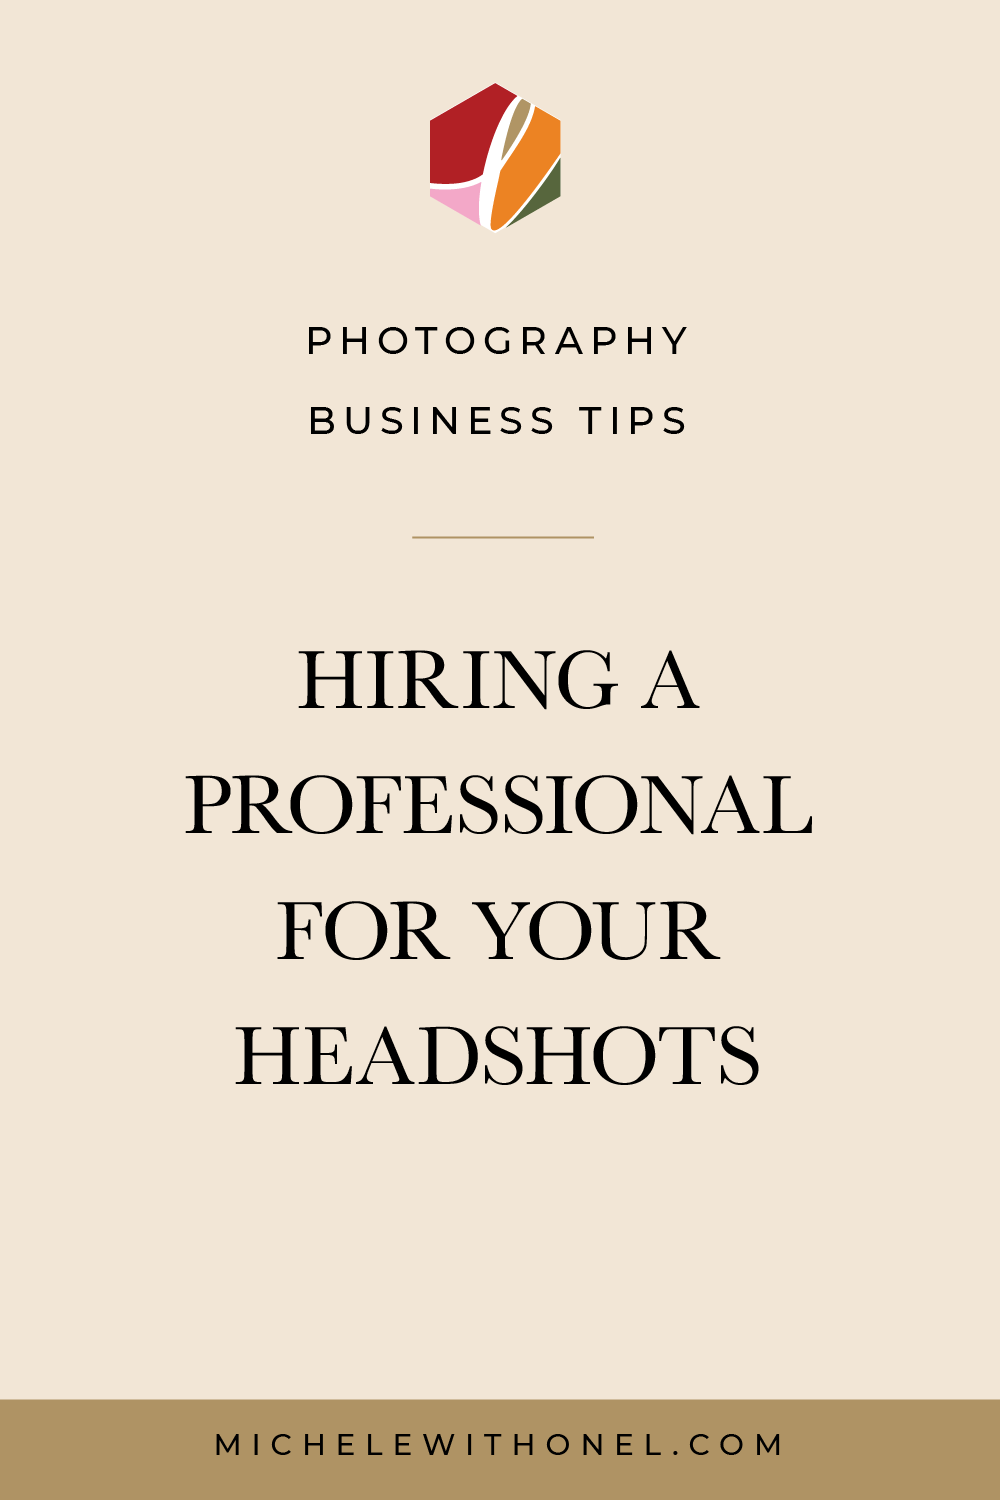 Looking at hiring a professional photographer? This post is for you! Learn the inside scoop for choosing the best photographer for your small business (from a pro photographer)—including: brand photography, photographer marketing, and photography business tips. #branding #photography #business #entrepreneur